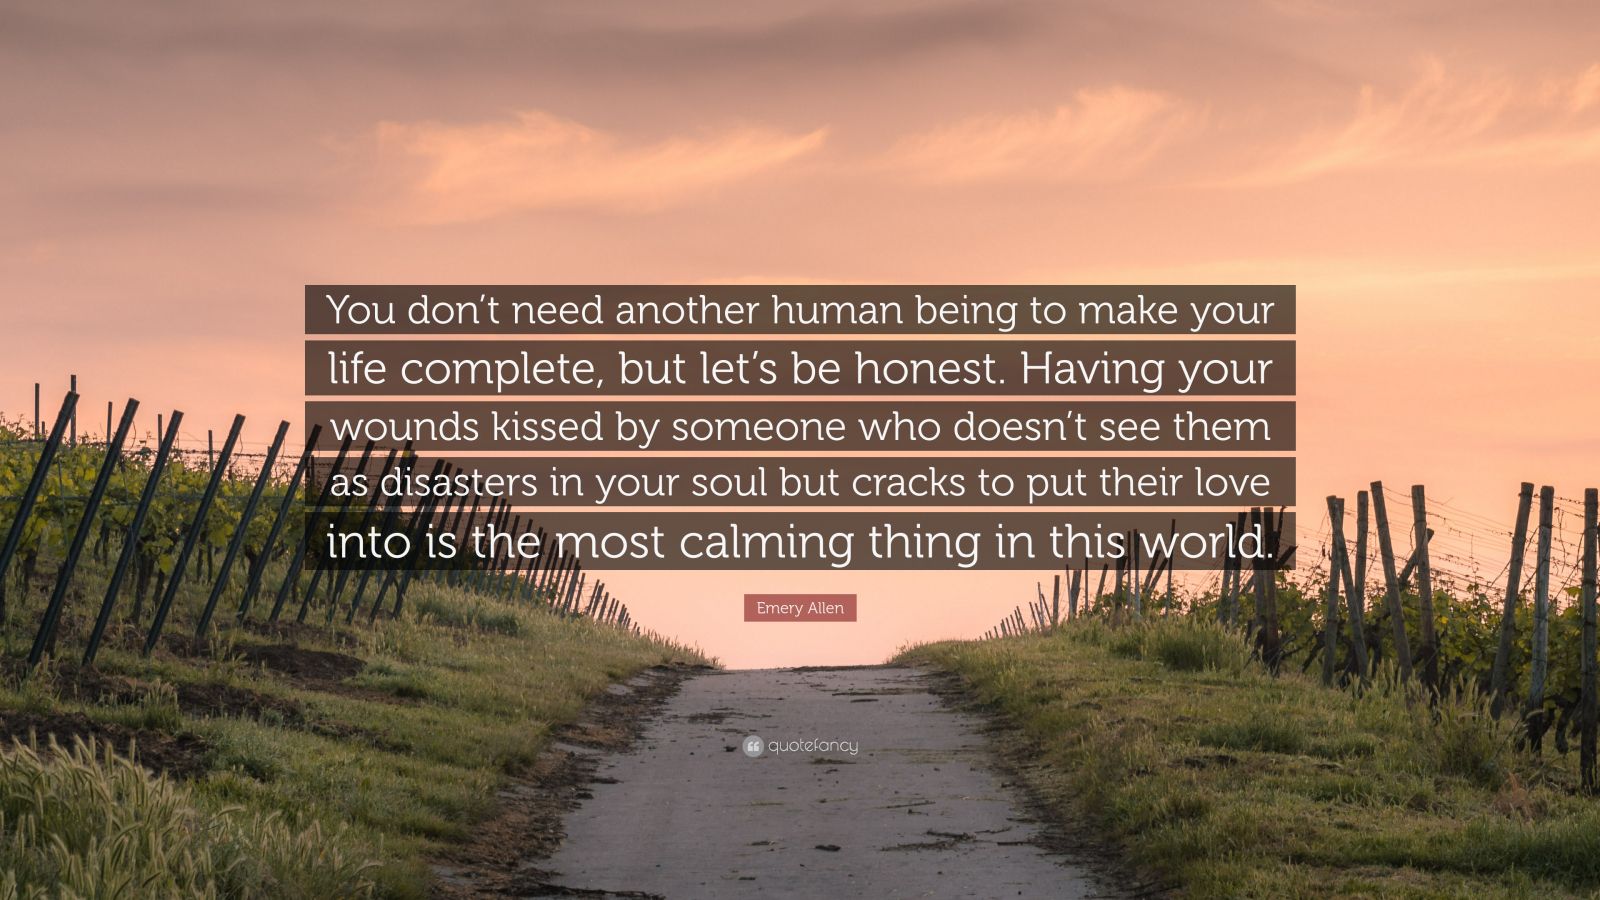 Emery Allen Quote: "You don't need another human being to ...